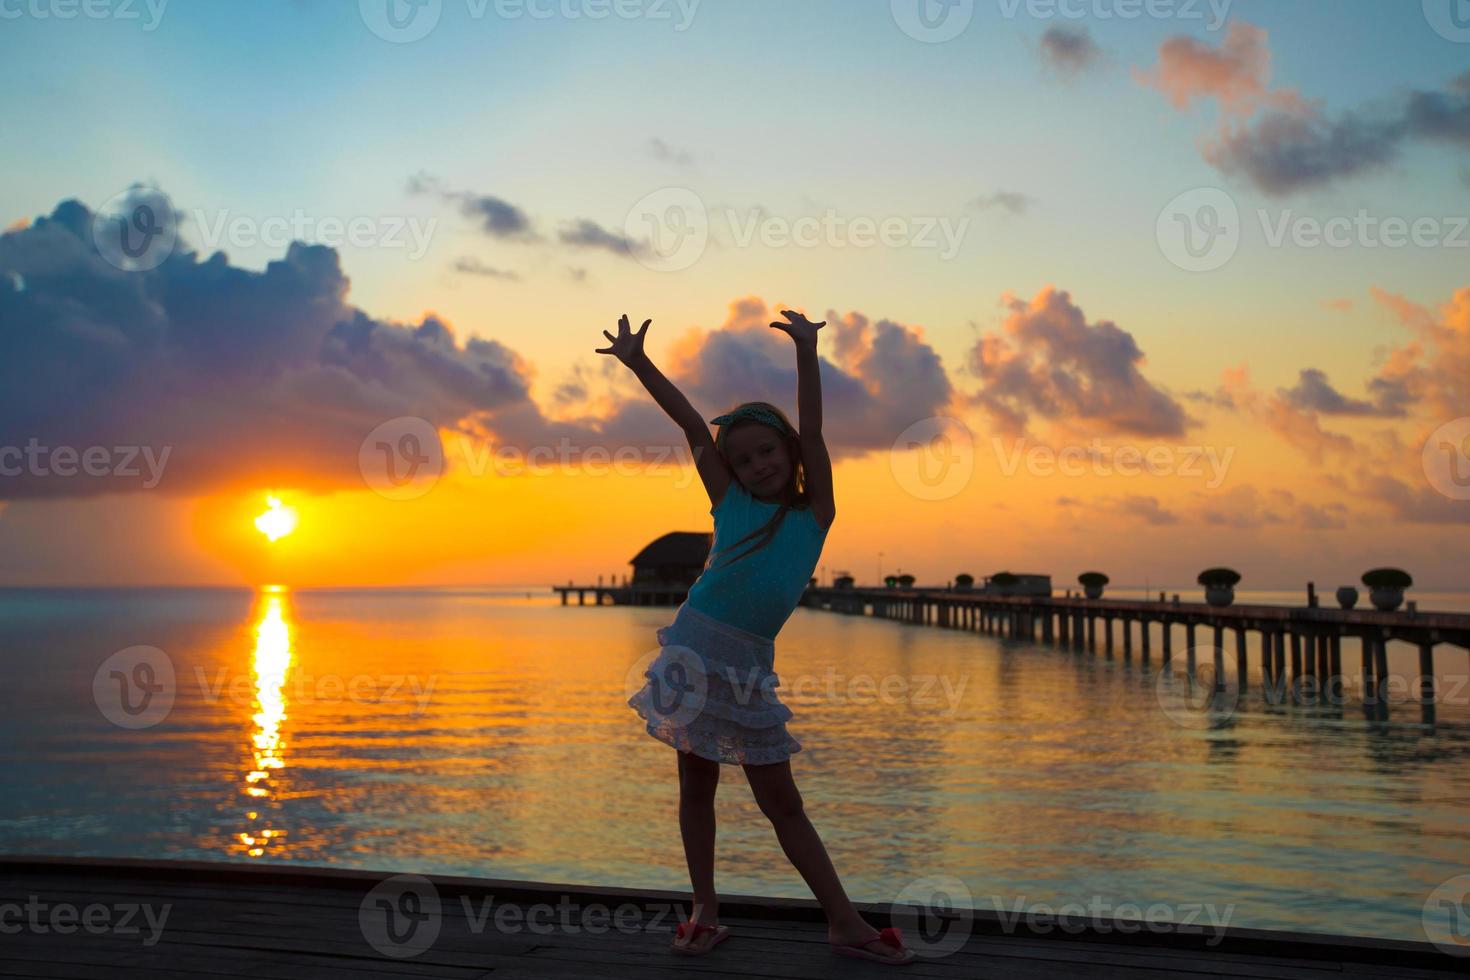 Silhouette of adorable little girl on wooden jetty at sunset photo